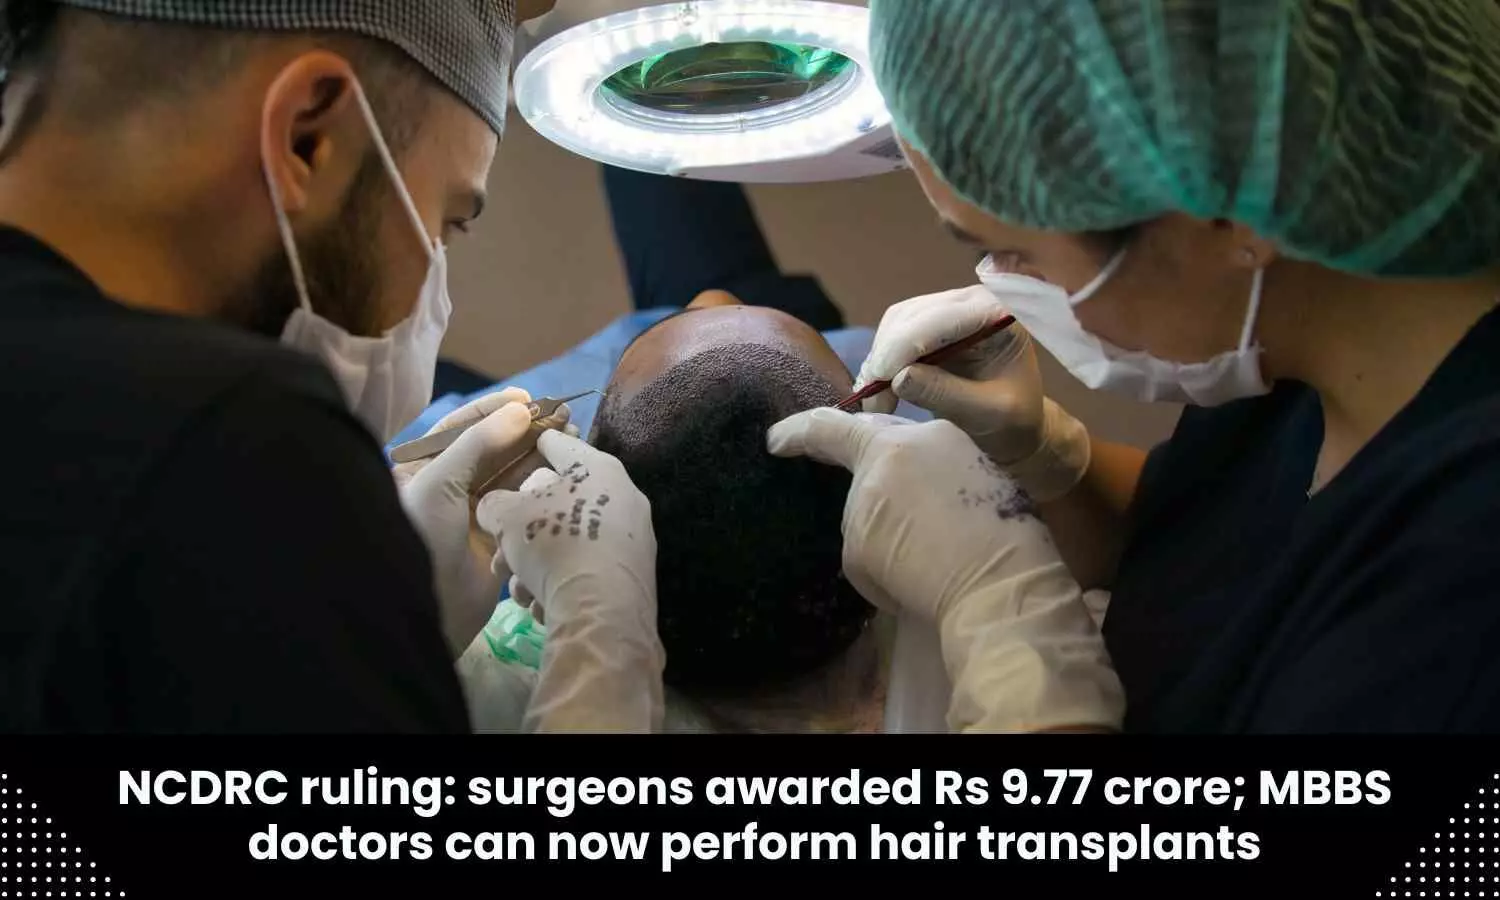 No medical negligence during hair transplant procedure: NCDRC exonerates Hair Transplant Clinic, two surgeons